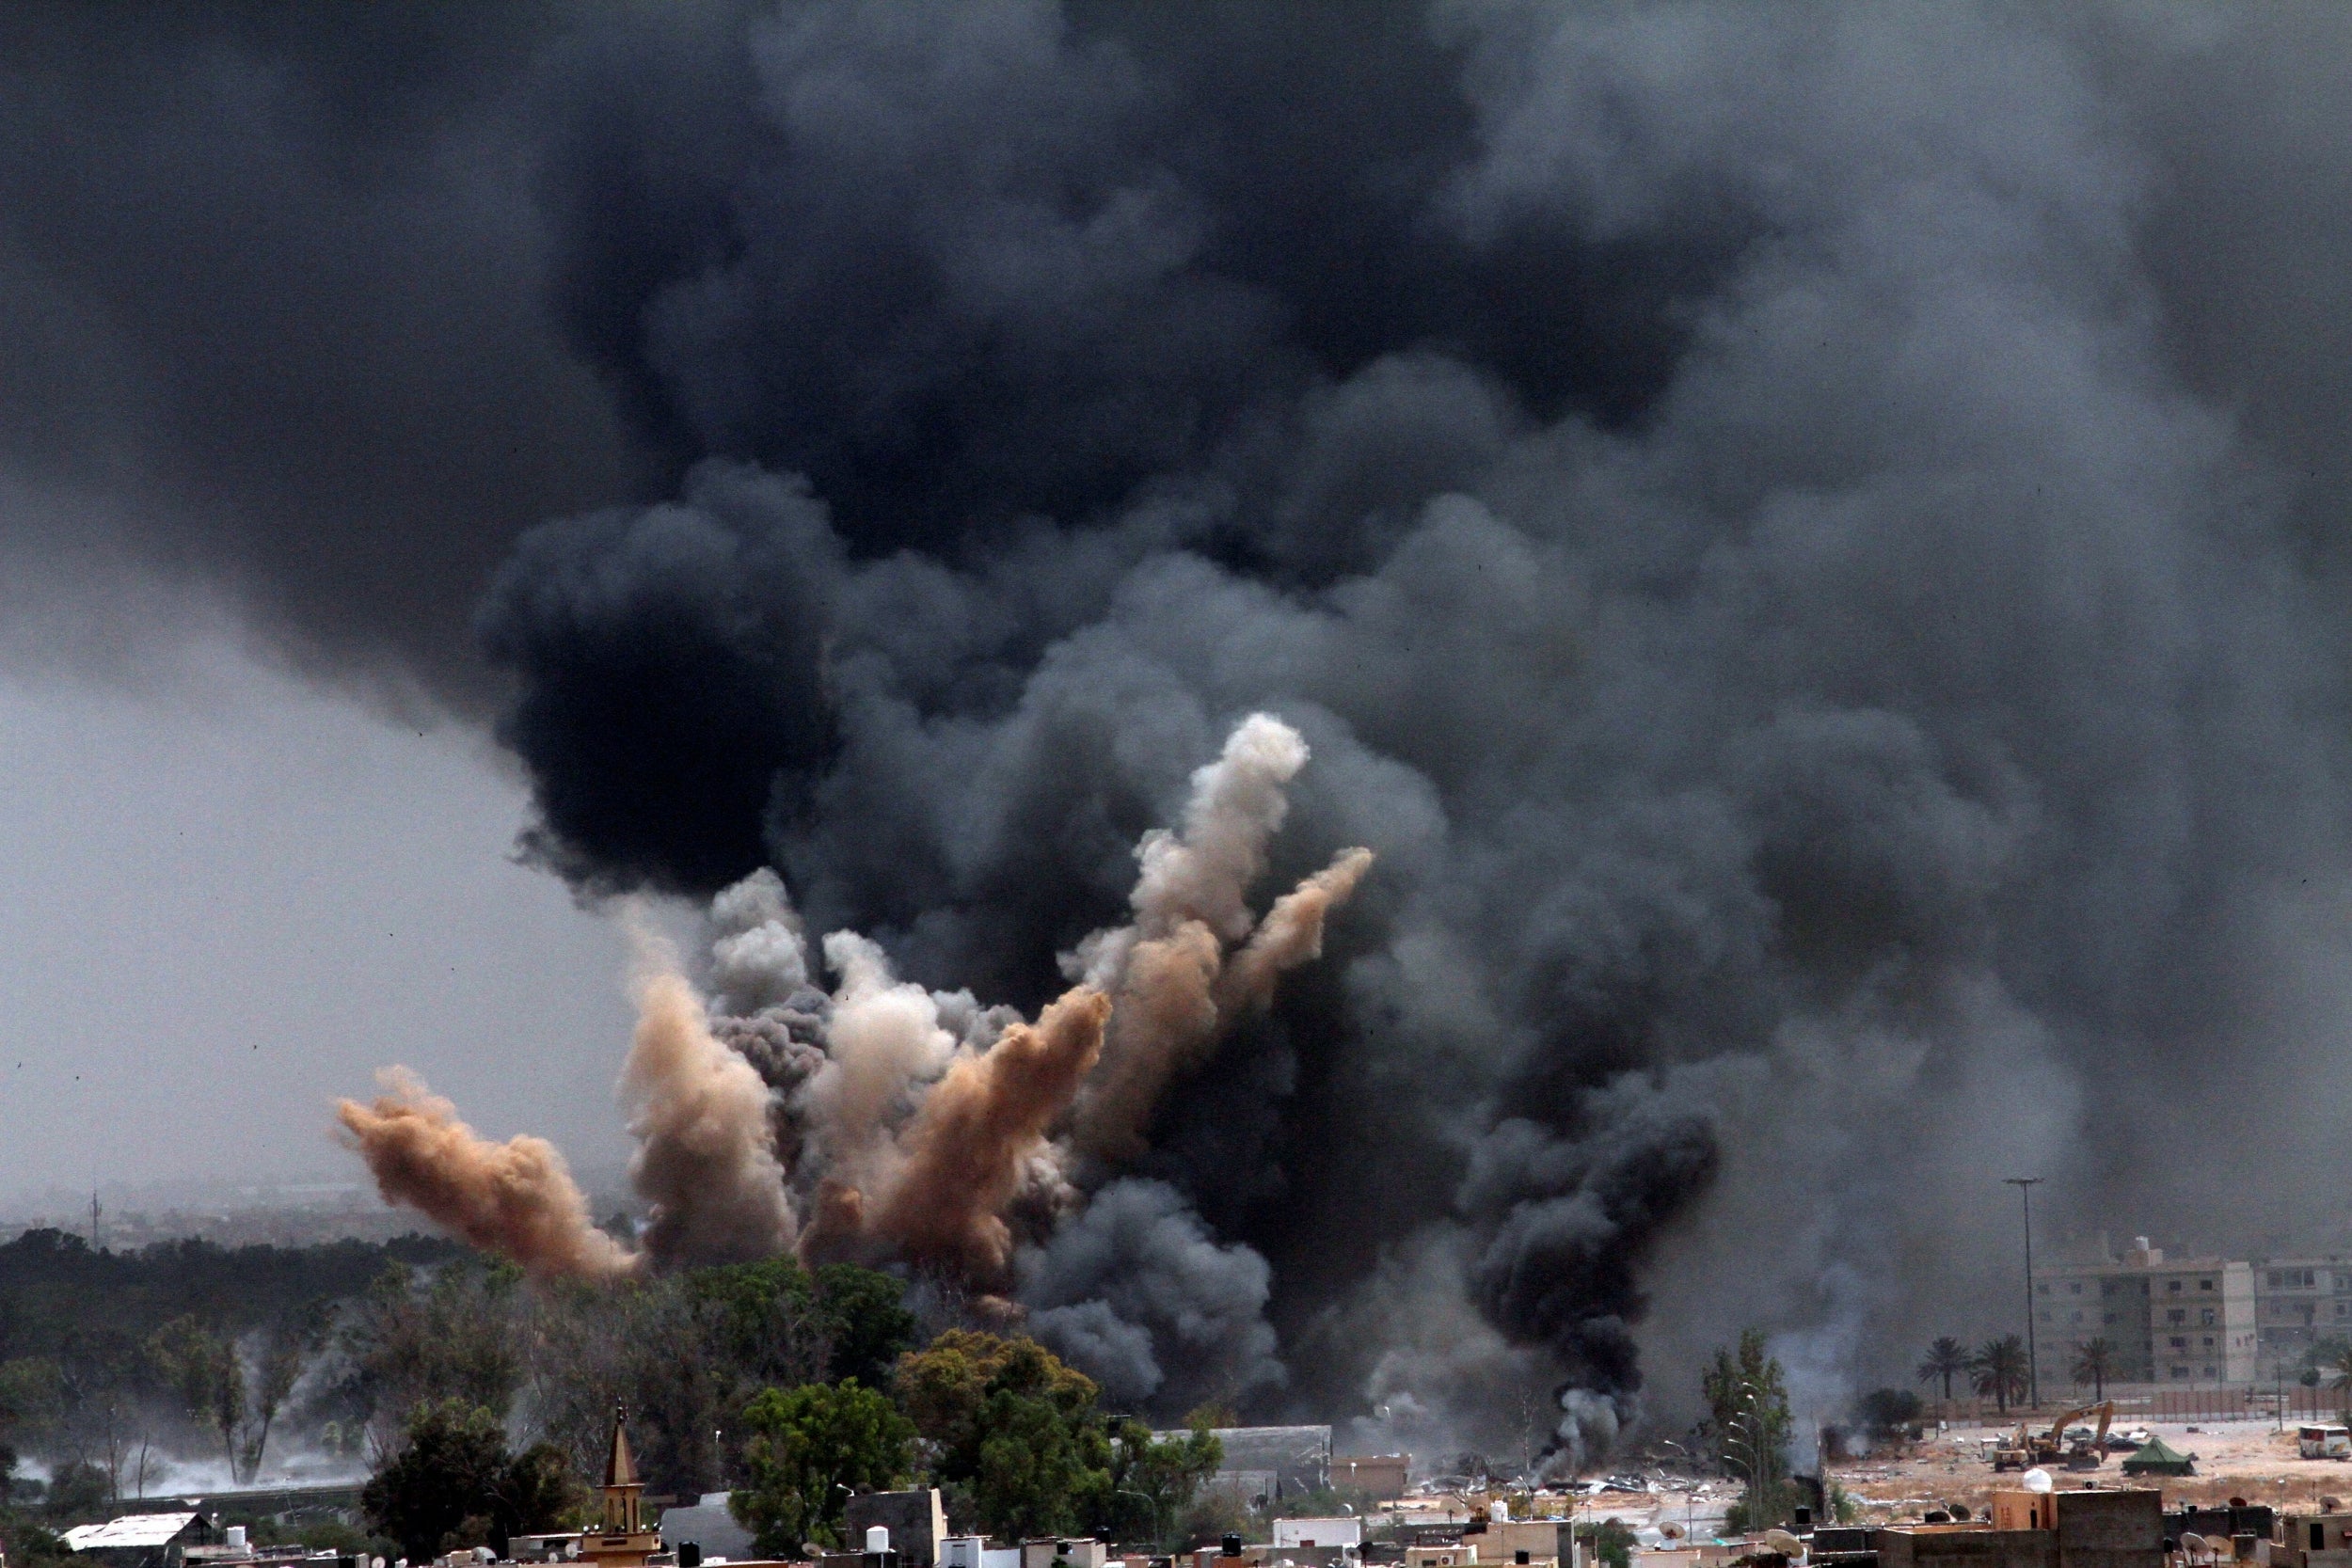 Smoke rises to the sky after a Nato airstrike in Tripoli, Libya, in 2011